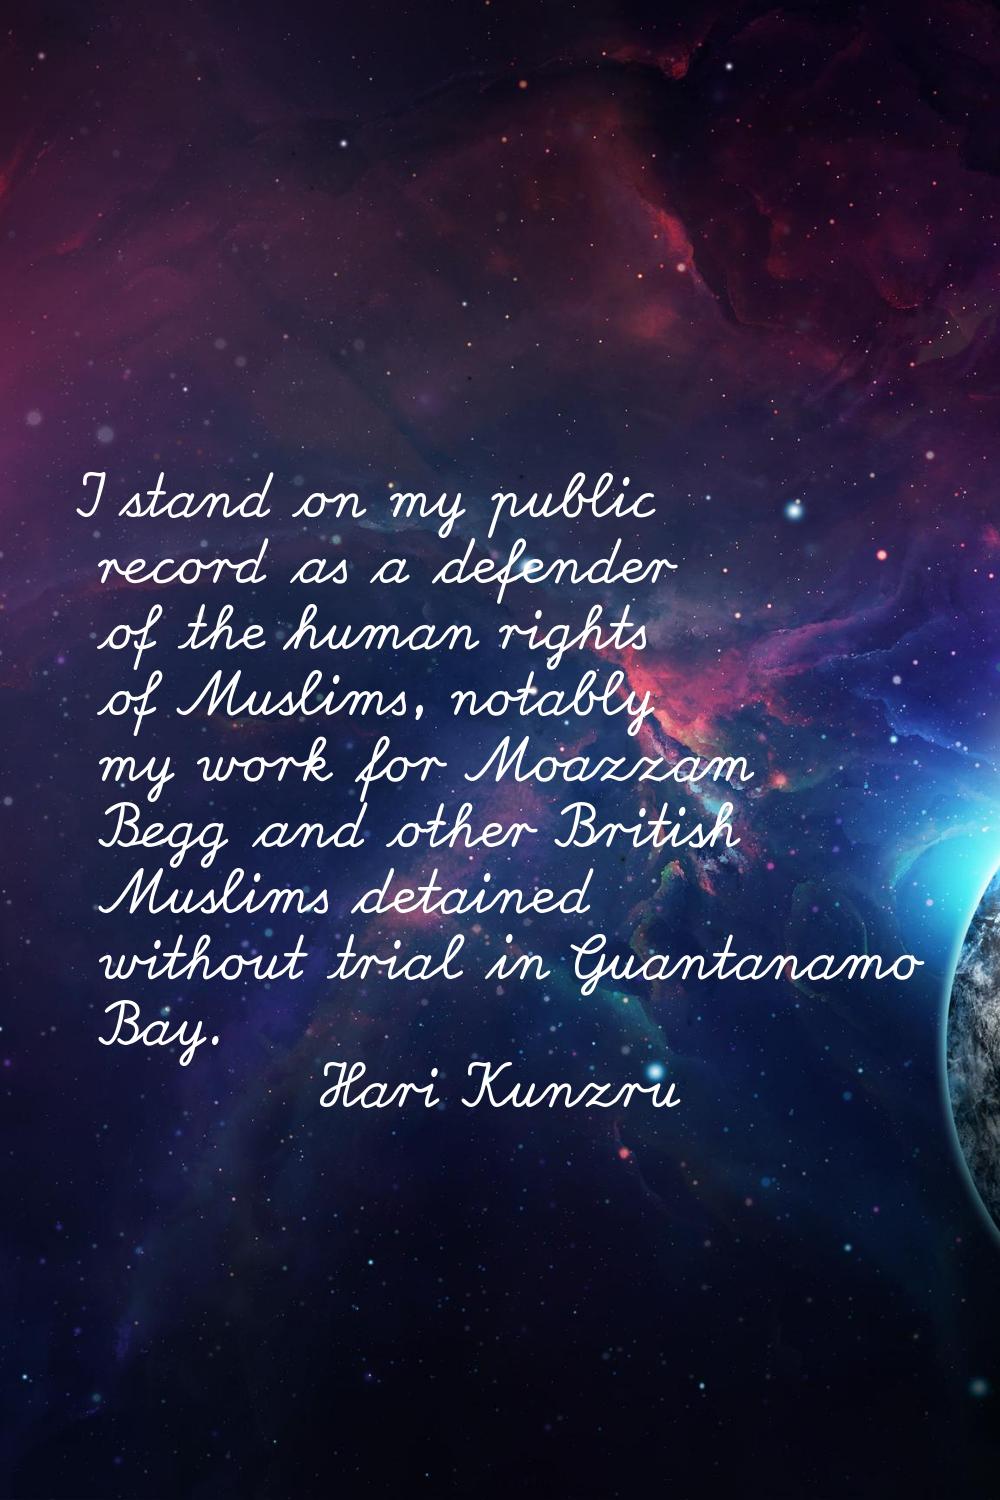 I stand on my public record as a defender of the human rights of Muslims, notably my work for Moazz